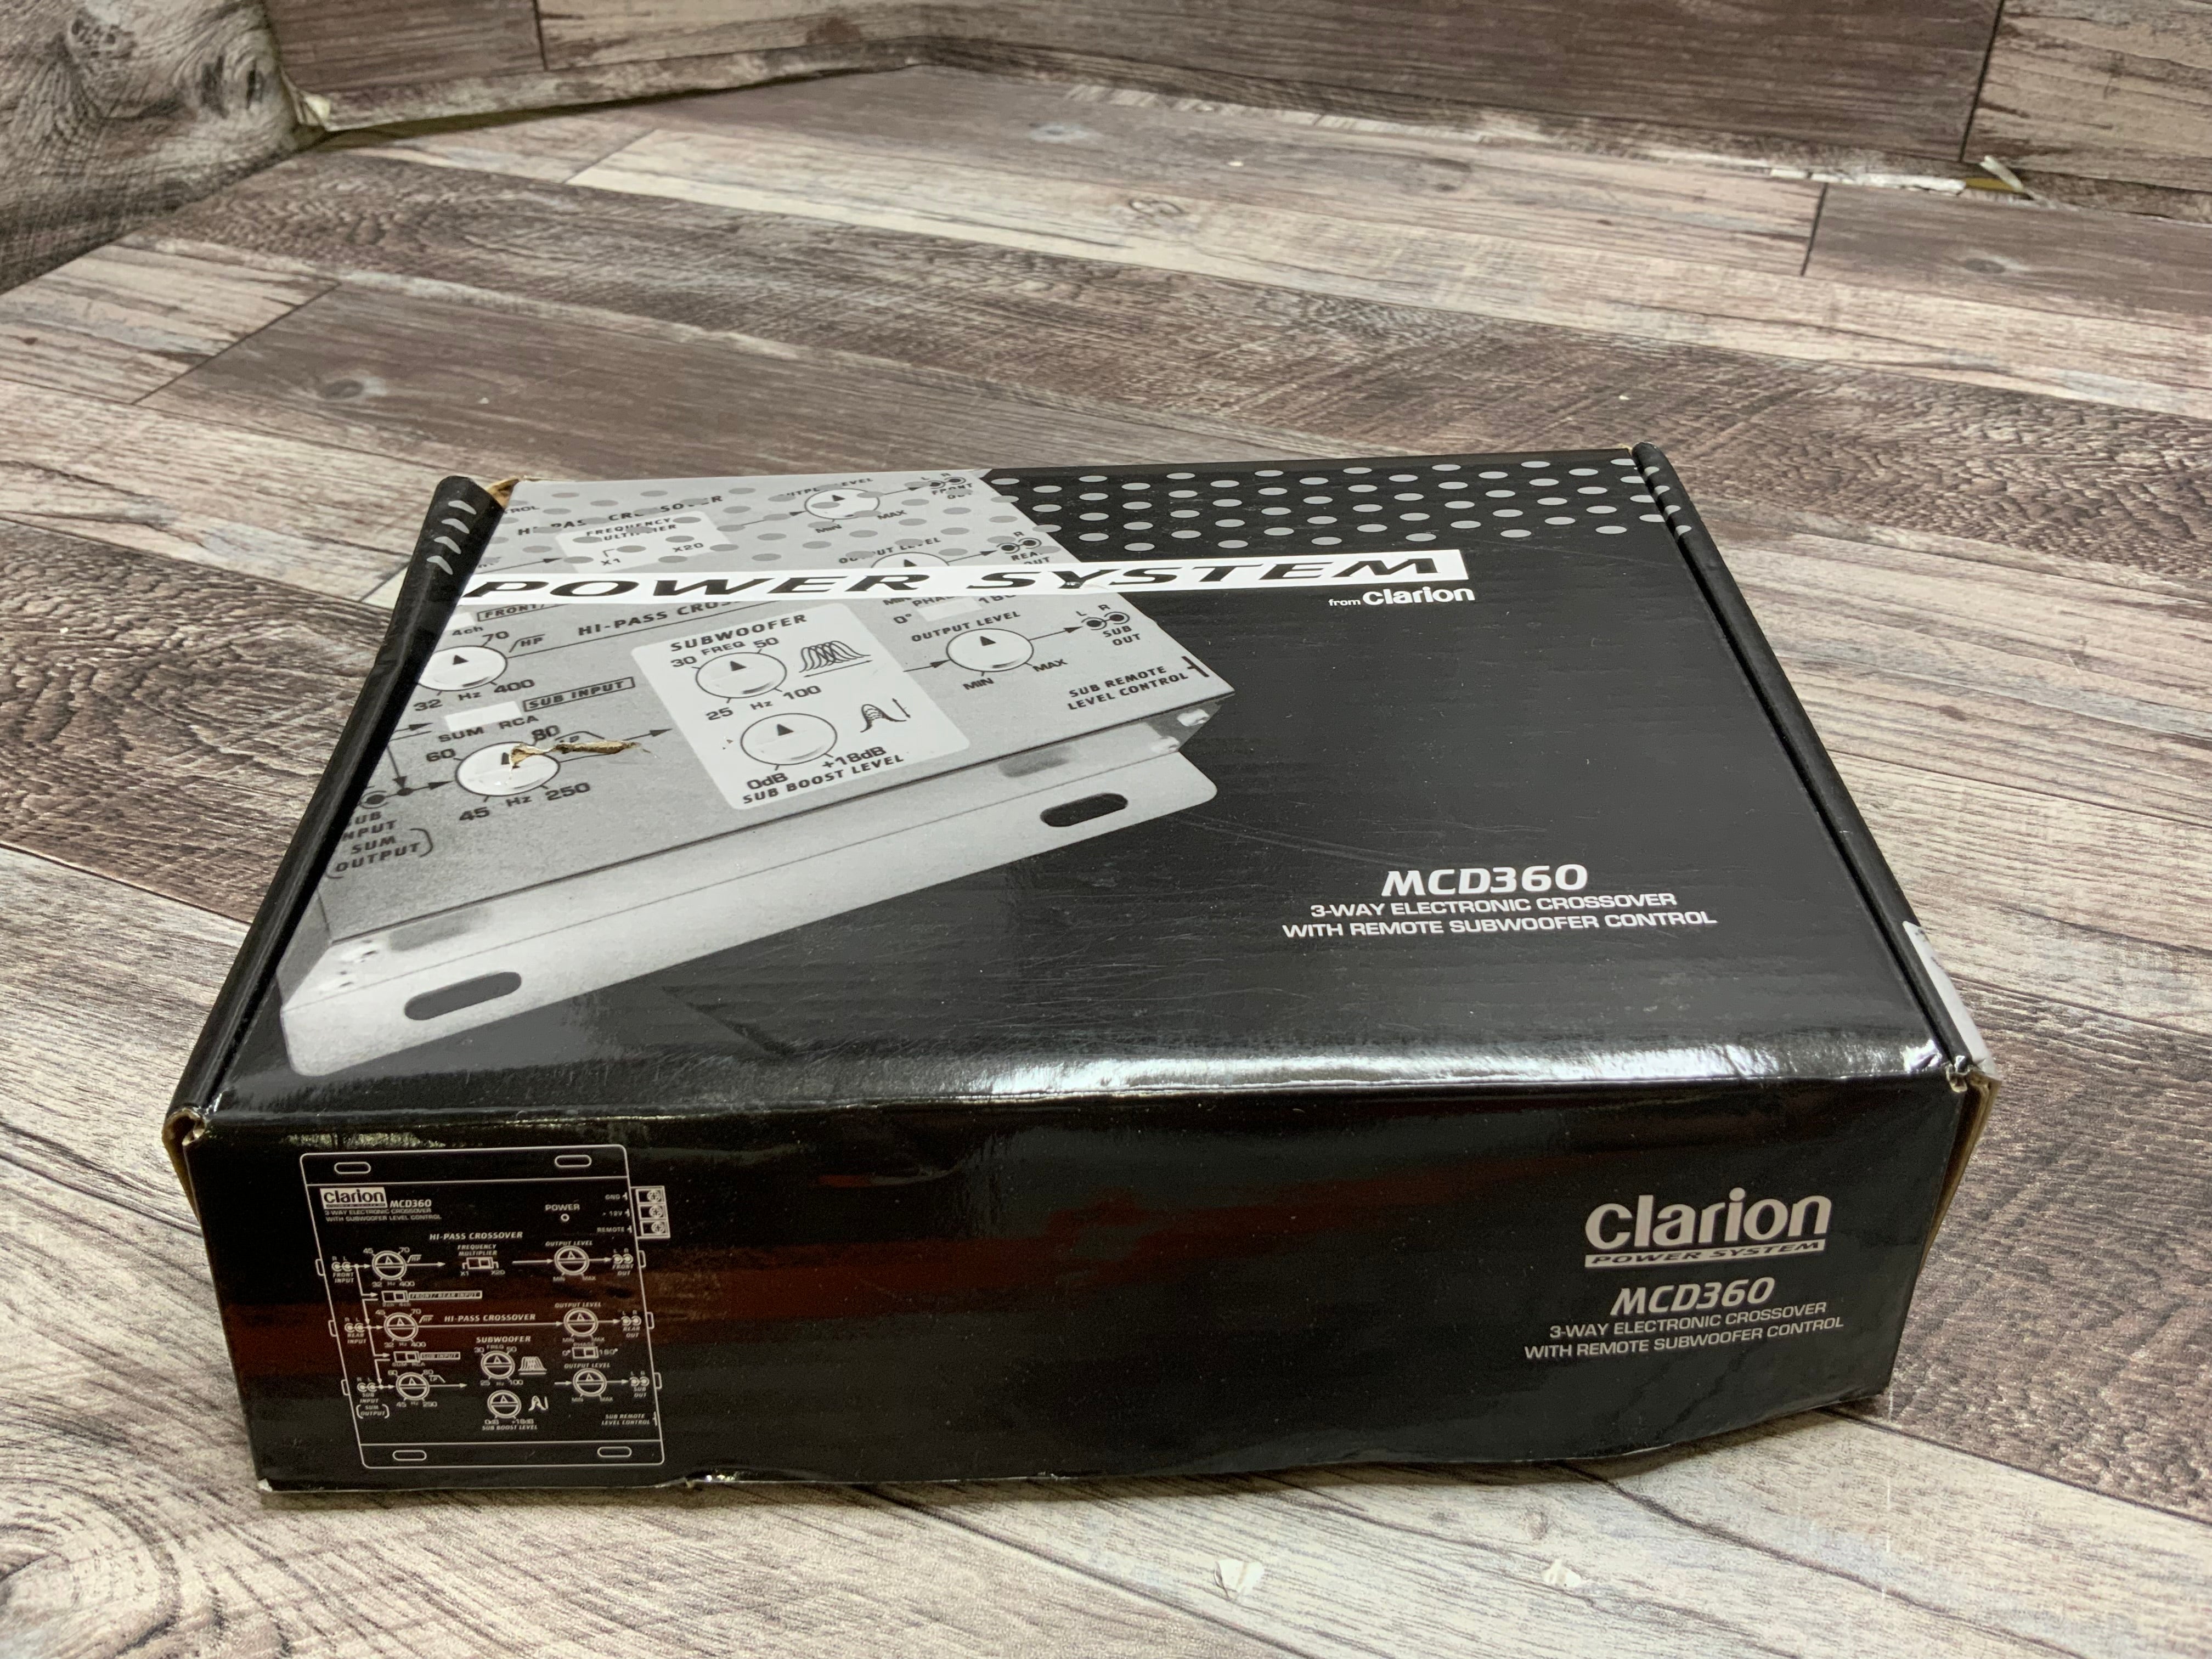 Clarion Mcd360 3 Way 6 Channel Electronic Crossover with Subwoofer Control (8094718886126)